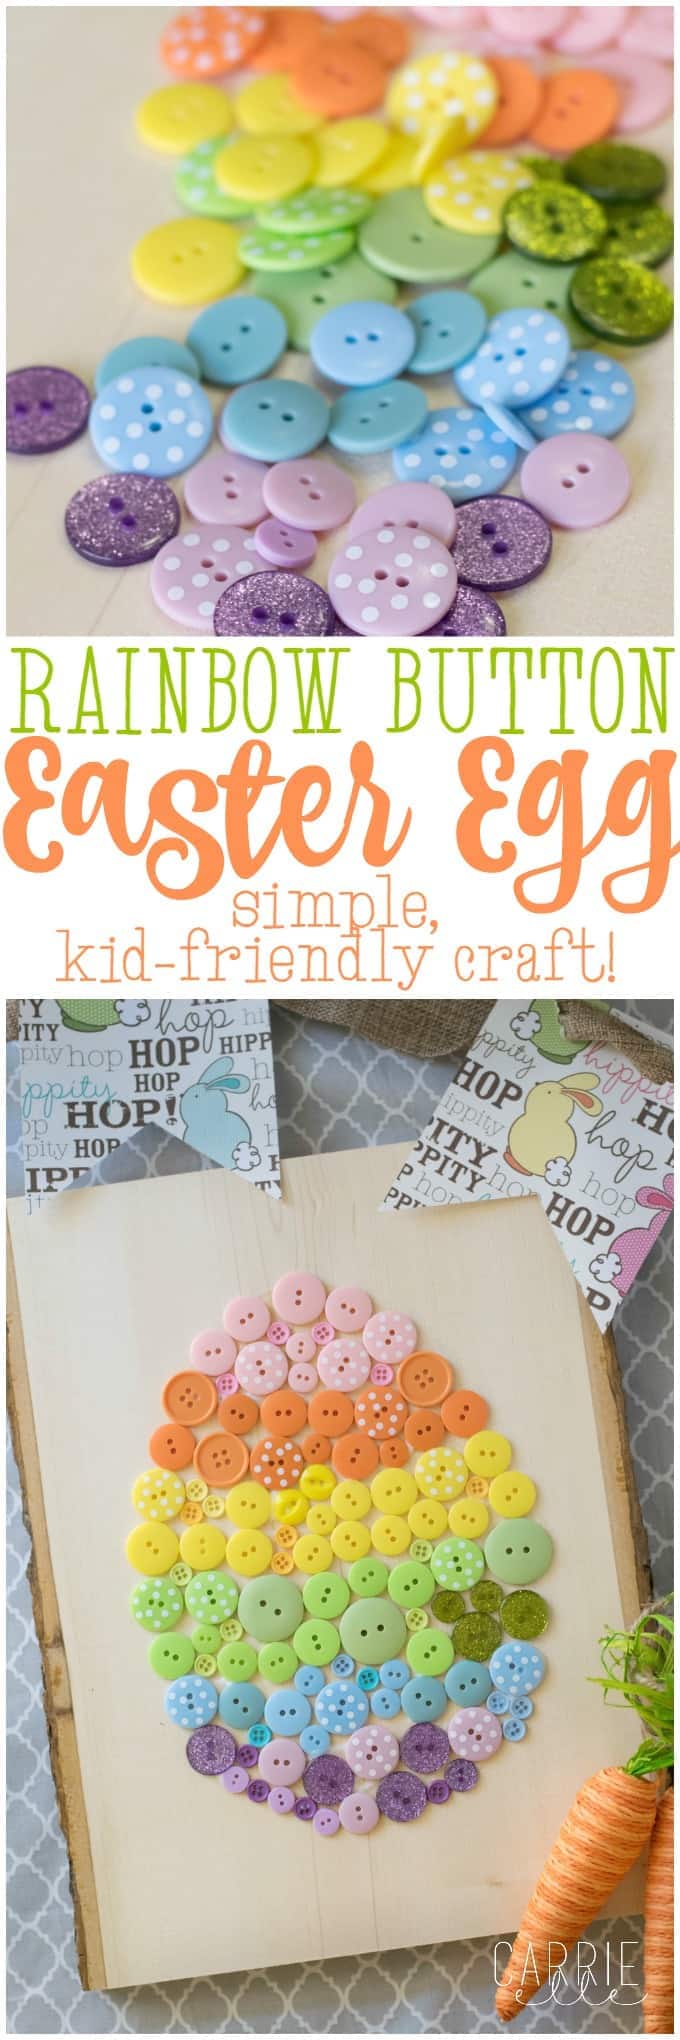 Easy Easter Craft Button Easter Egg